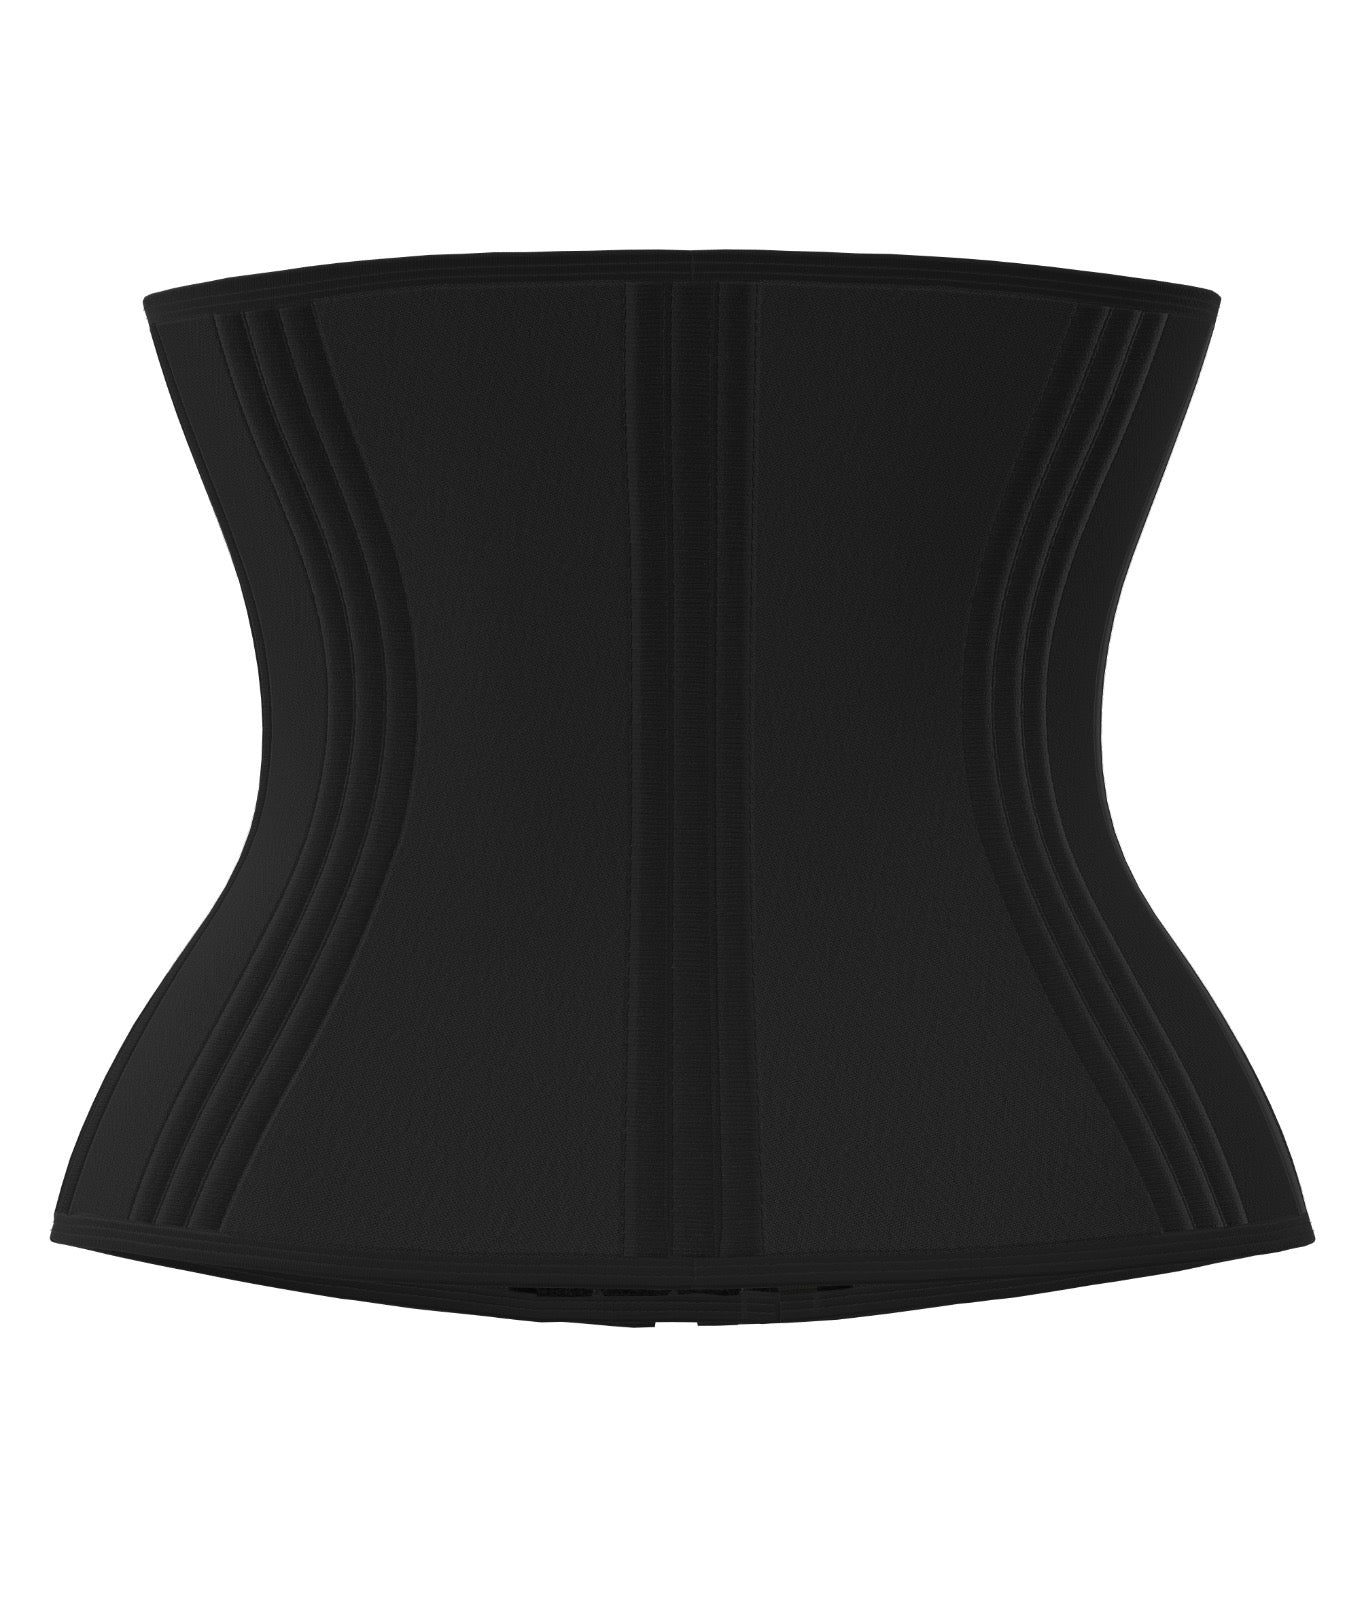 Extreme Waist Trainer with Zipper